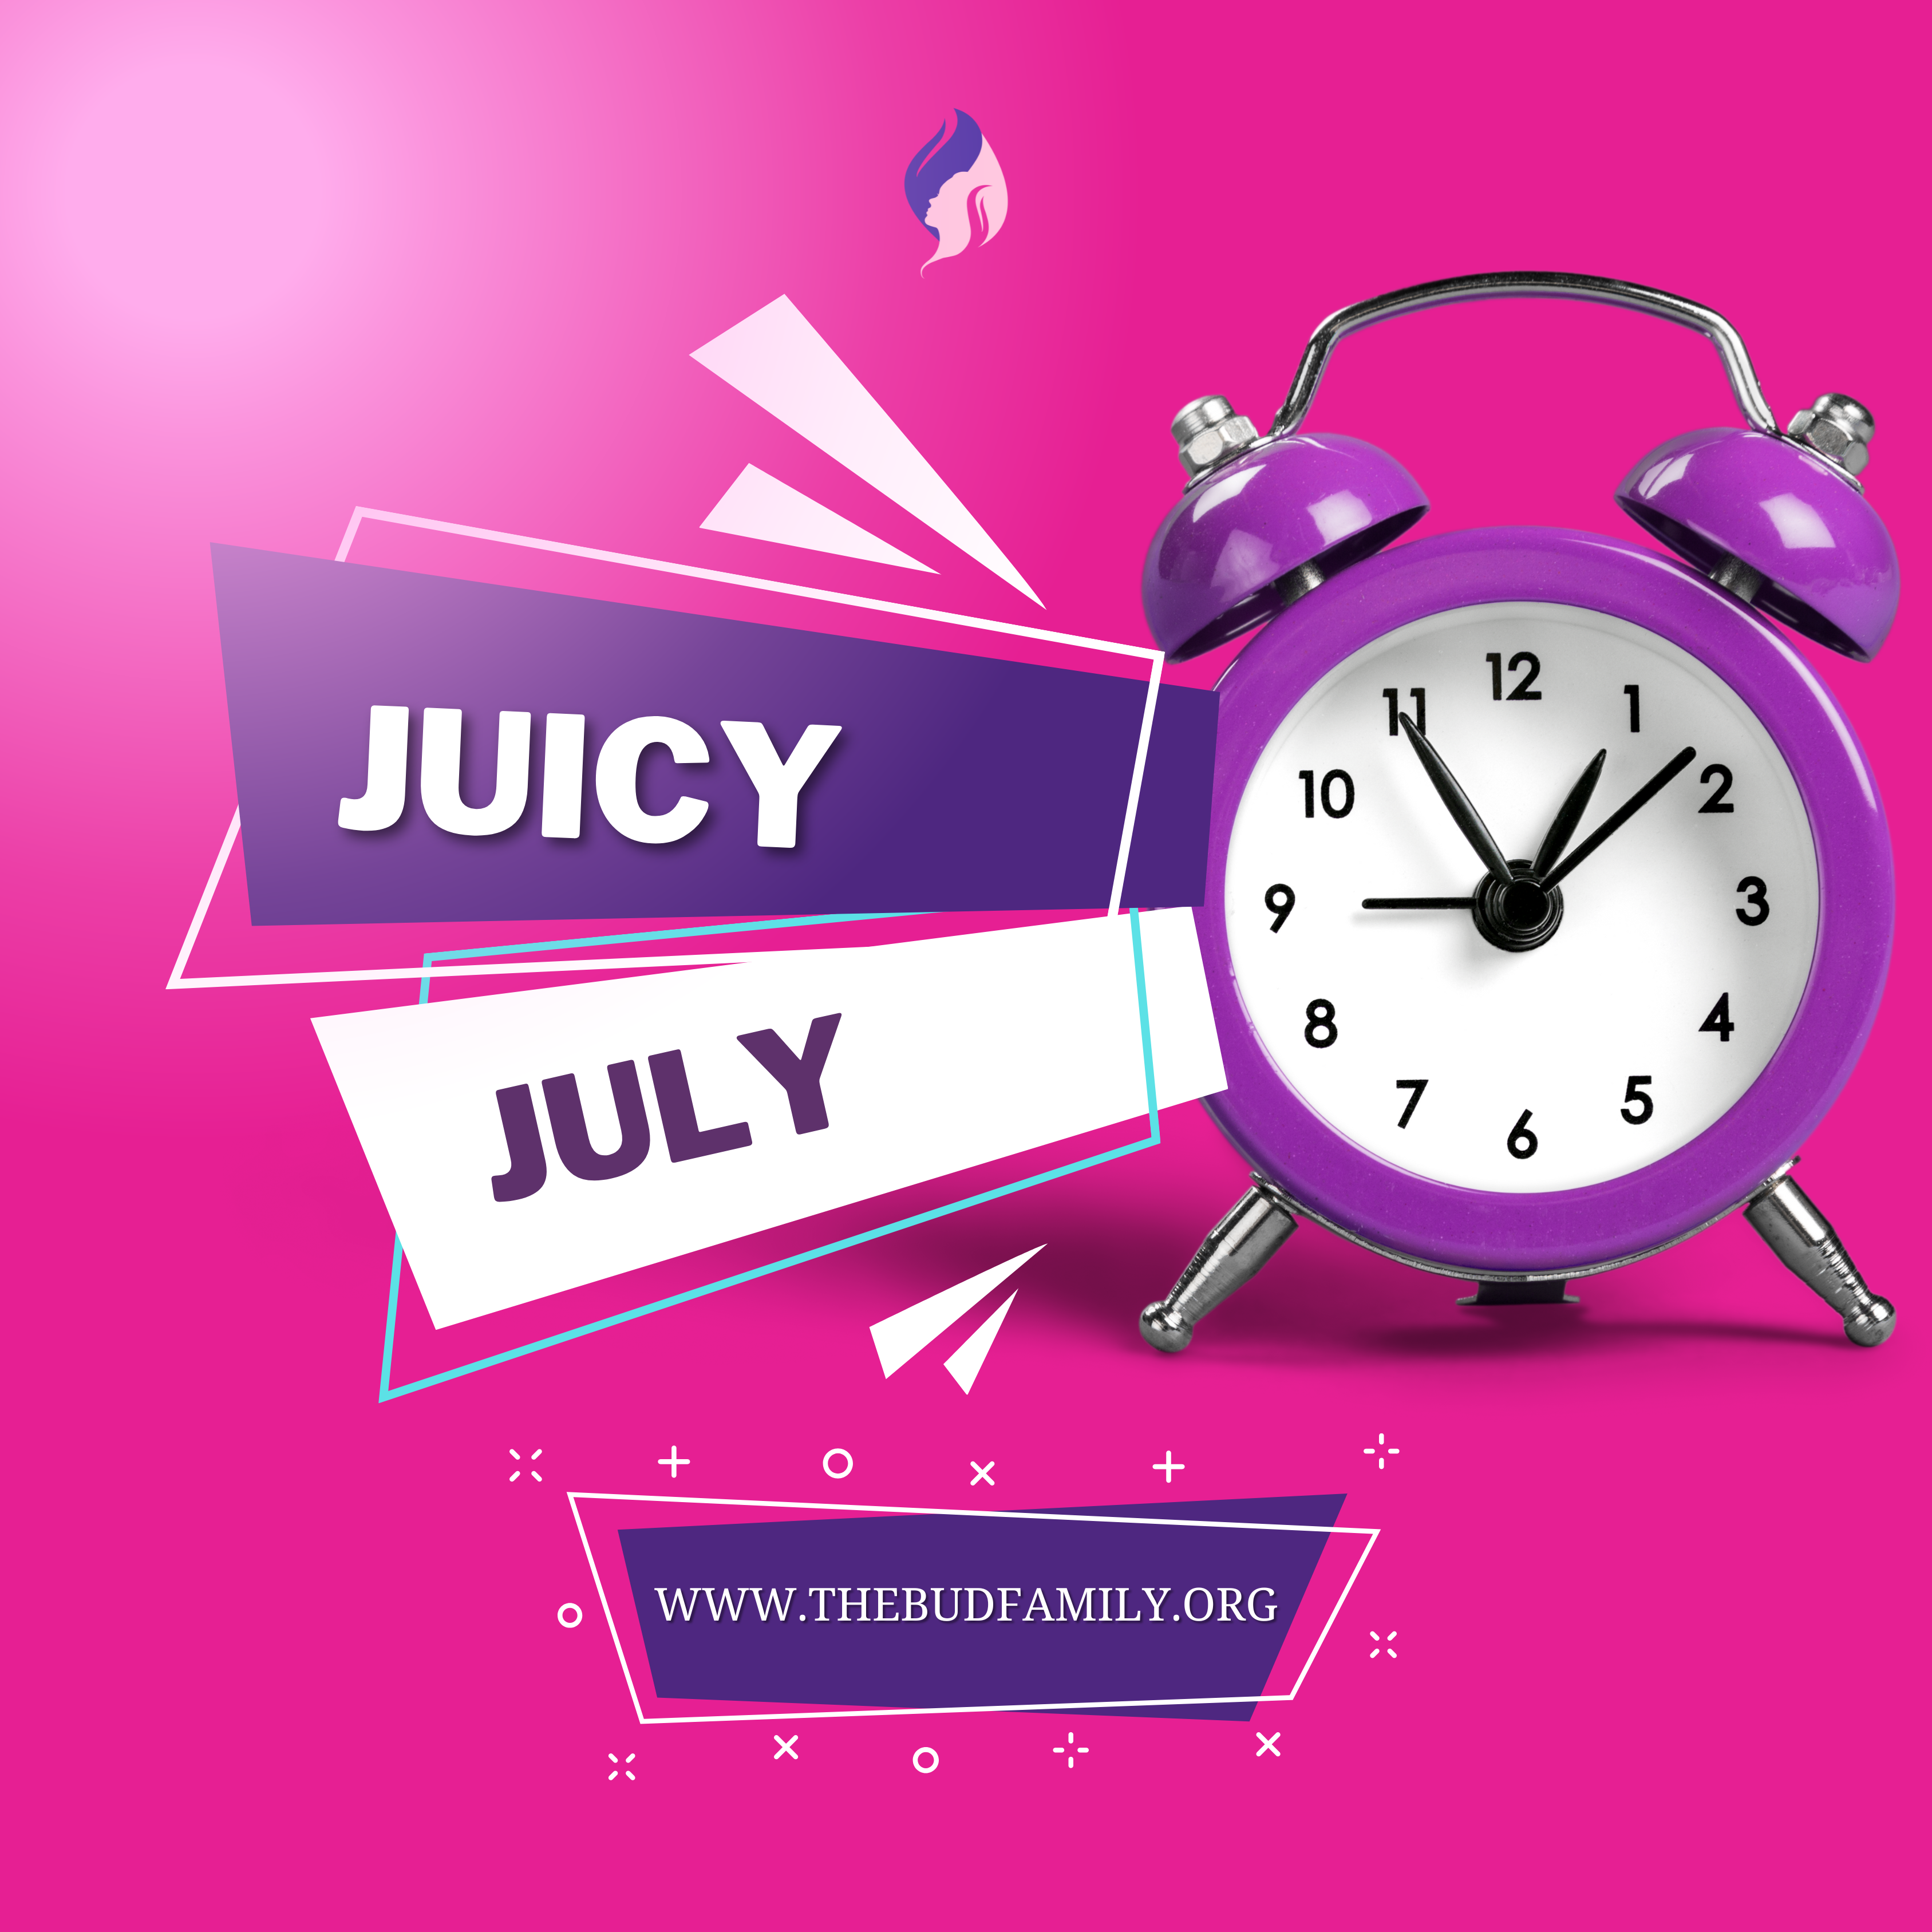 JUICY JULY: 5 TIPS FOR GETTING IN THE PRAYER MODE